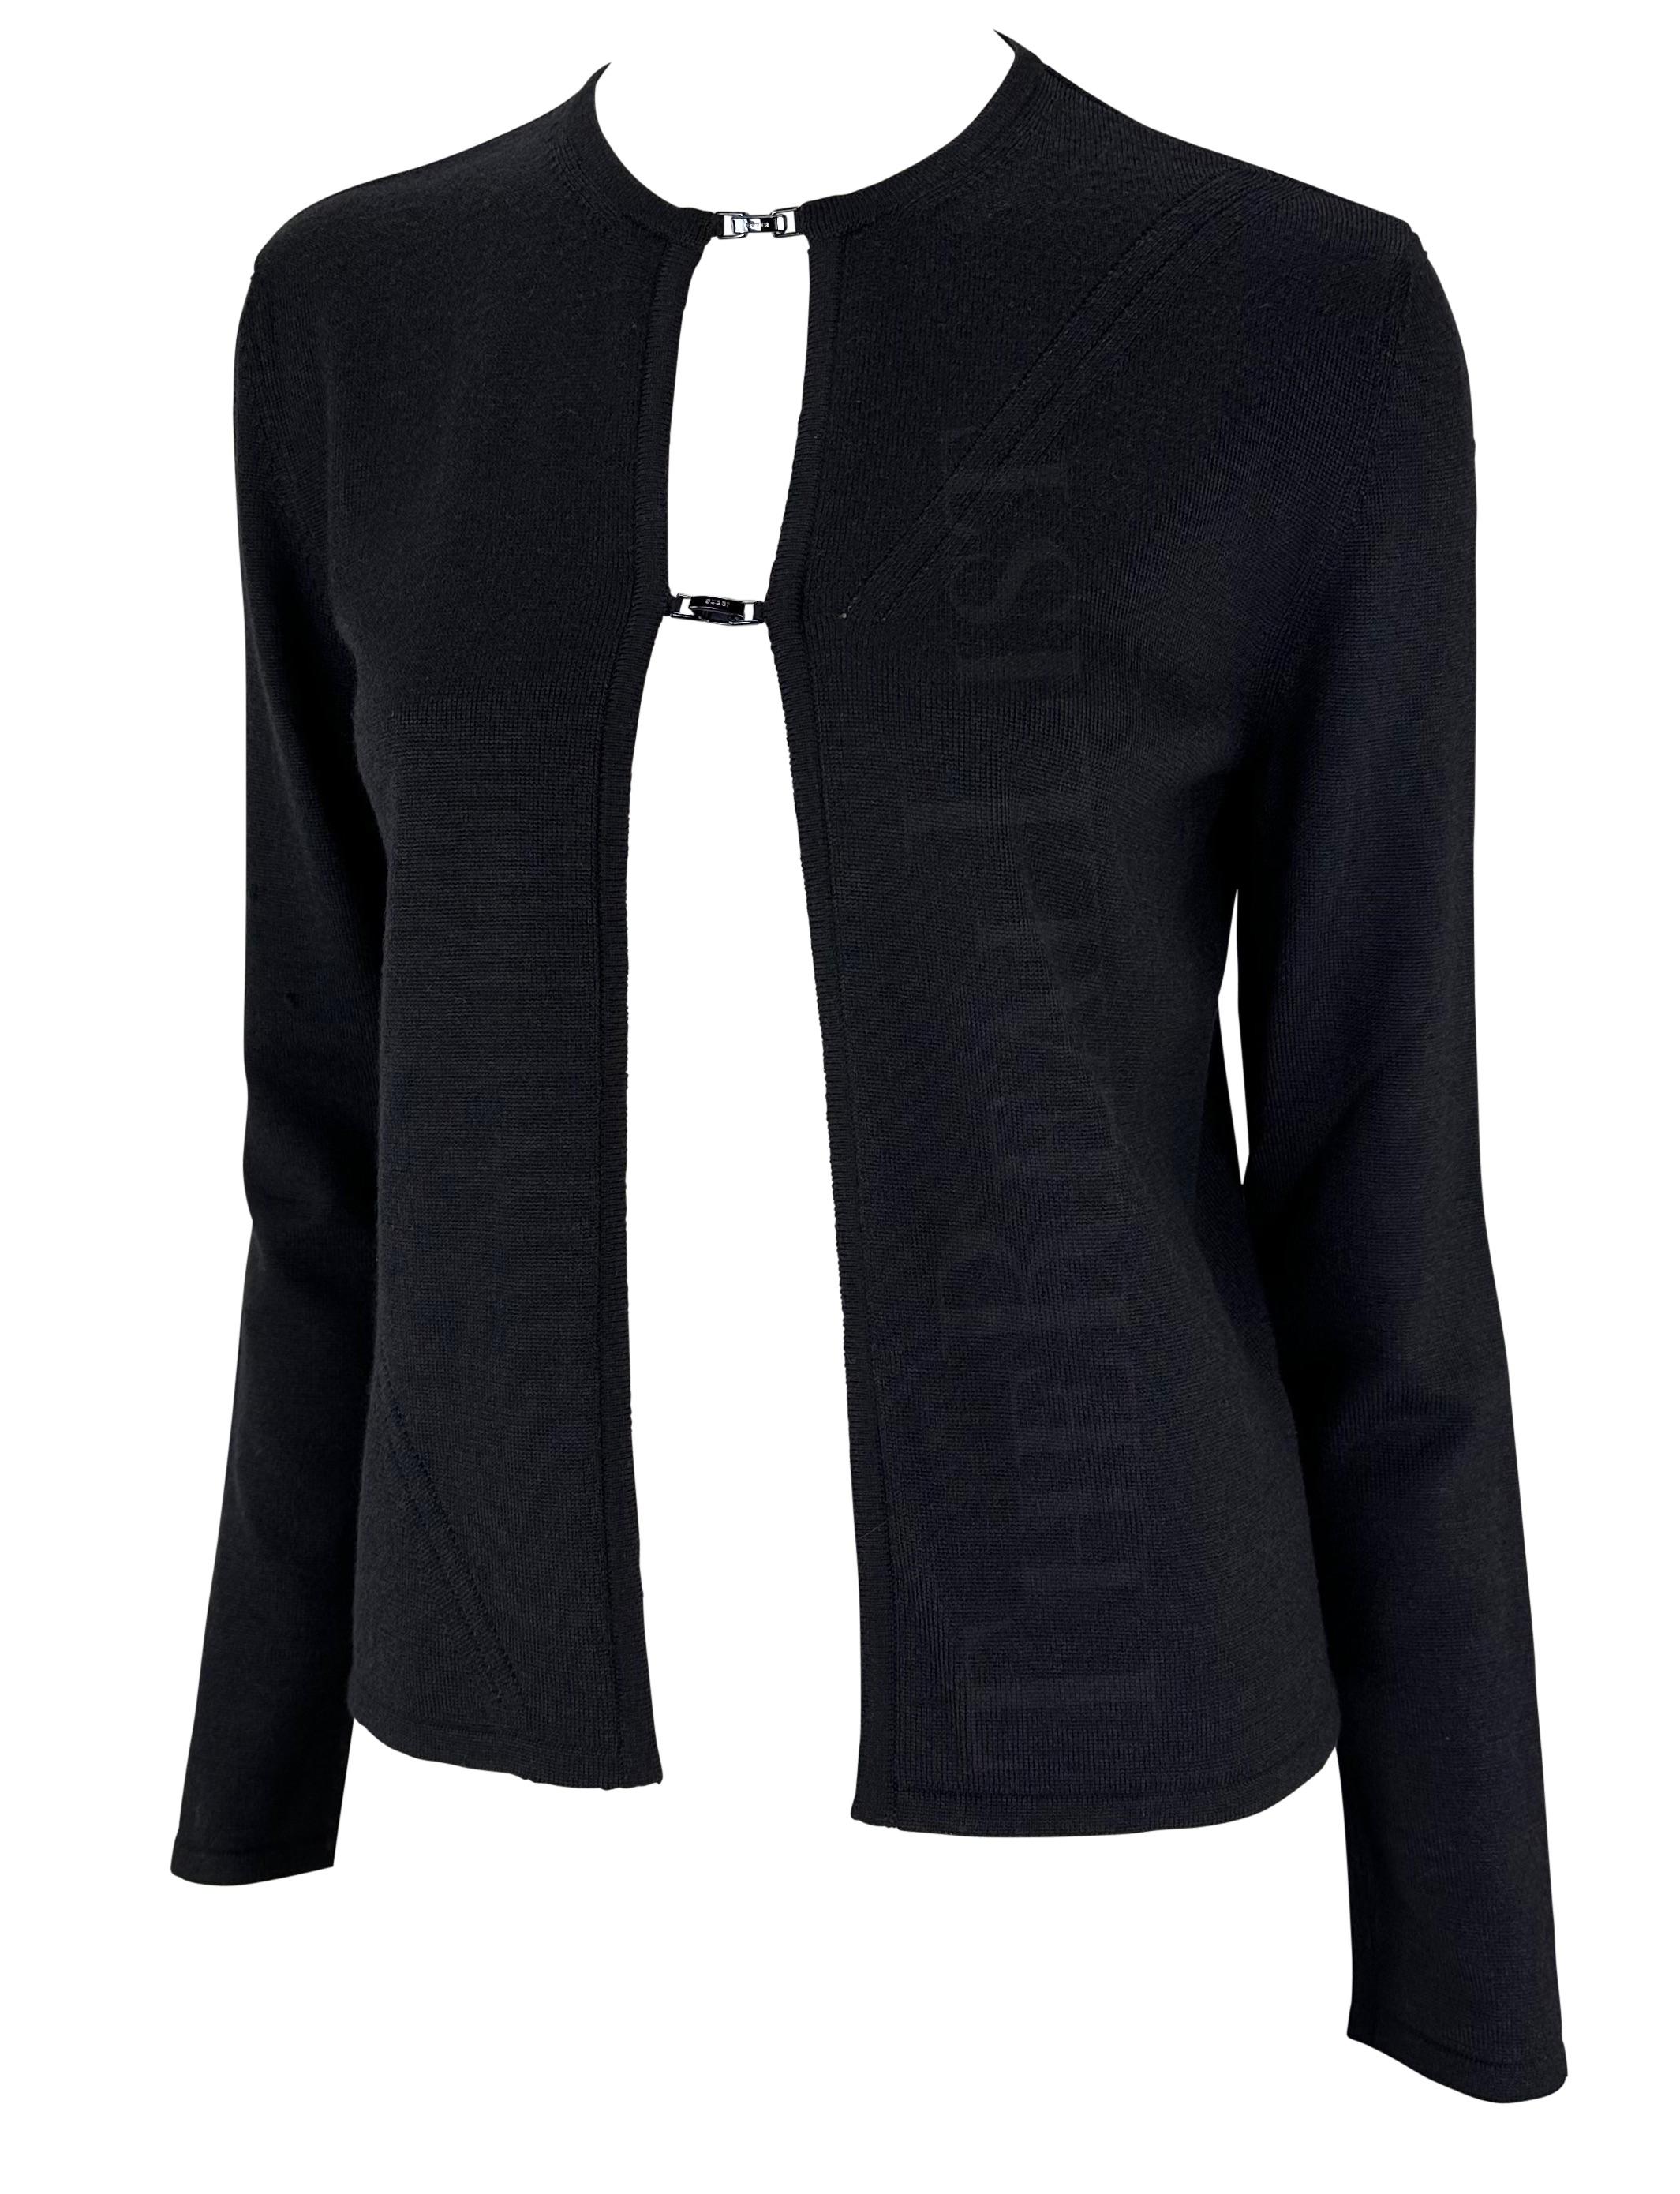 S/S 1998 Gucci by Tom Ford Charcoal Open Logo Buckle Cardigan Top In Excellent Condition For Sale In West Hollywood, CA